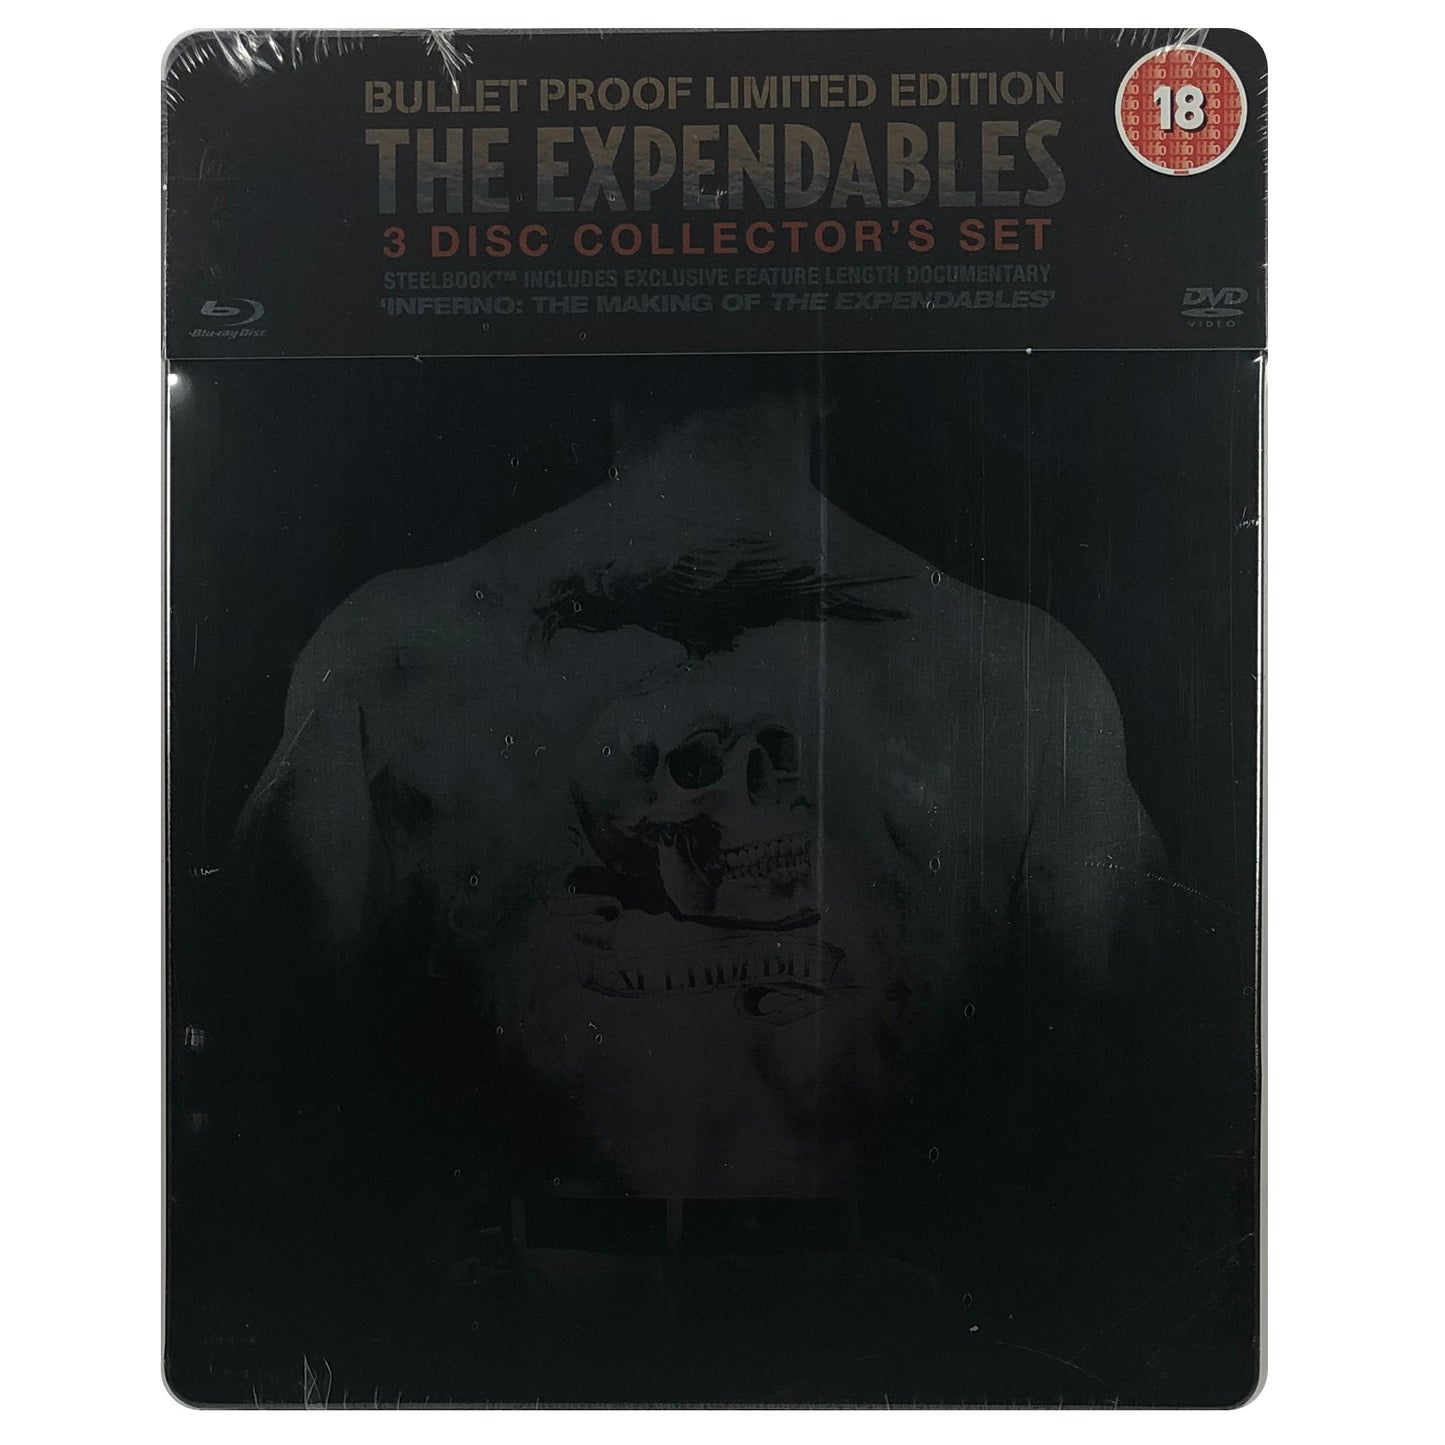 The Expendables Bullet Proof 3 Disc Collector's Set Blu-Ray Steelbook - Scratched